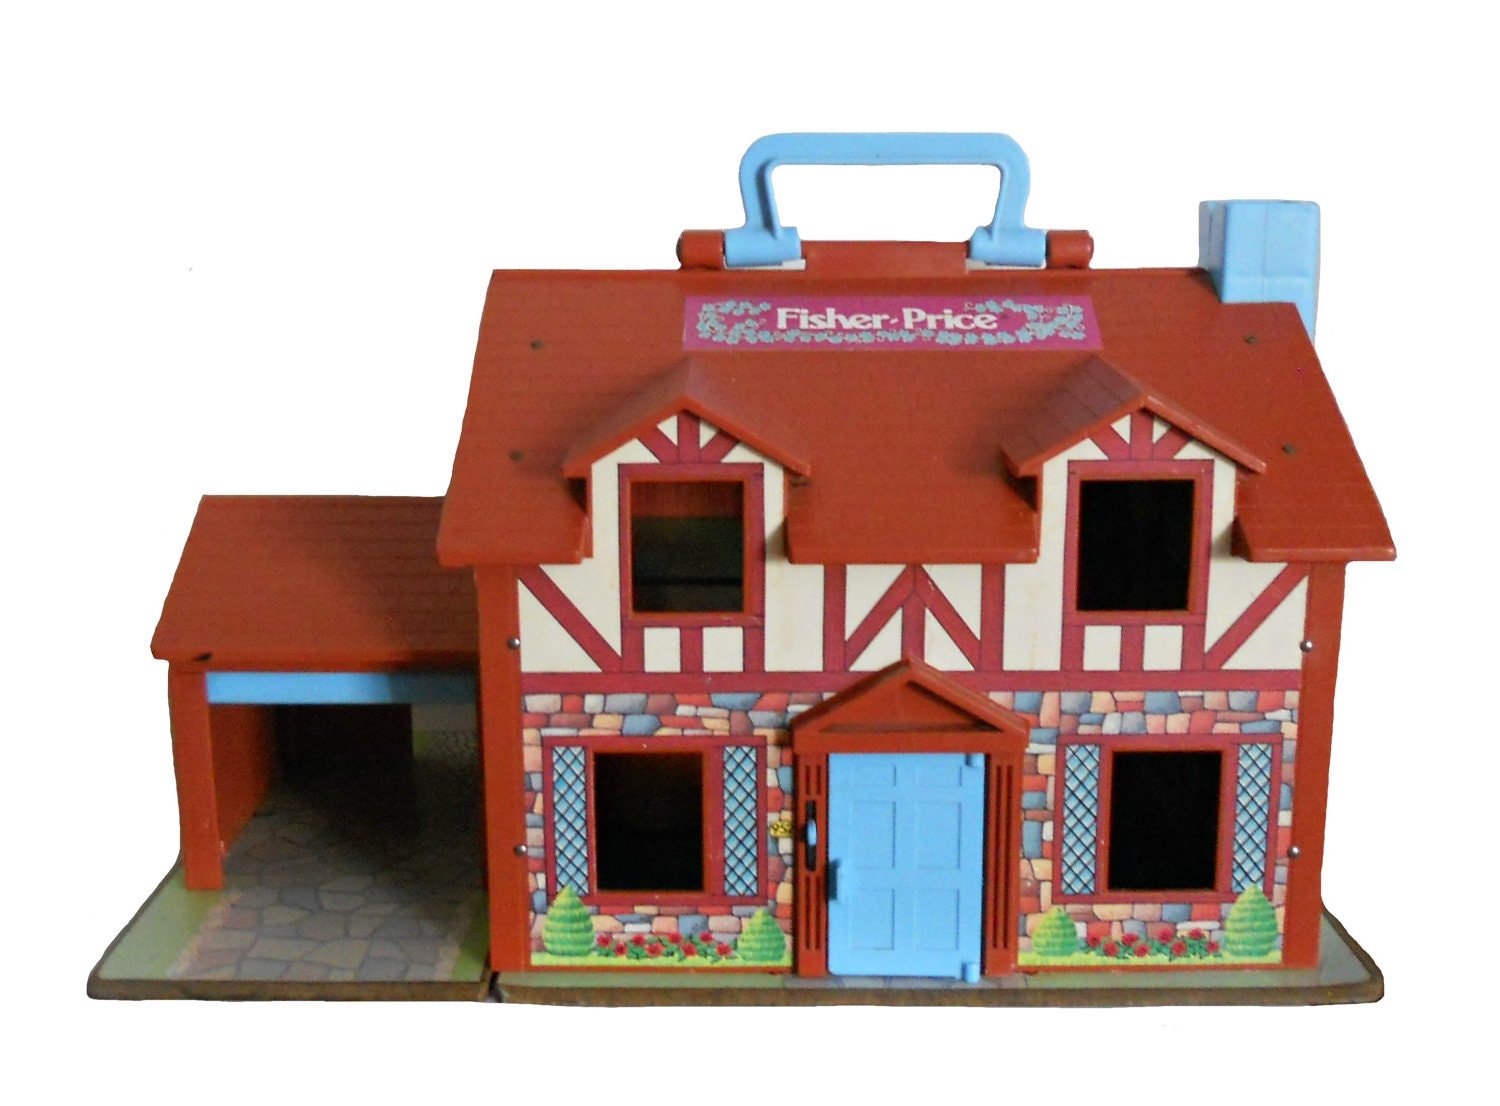 Vintage Fisher Price Play House 1980s Tudor by